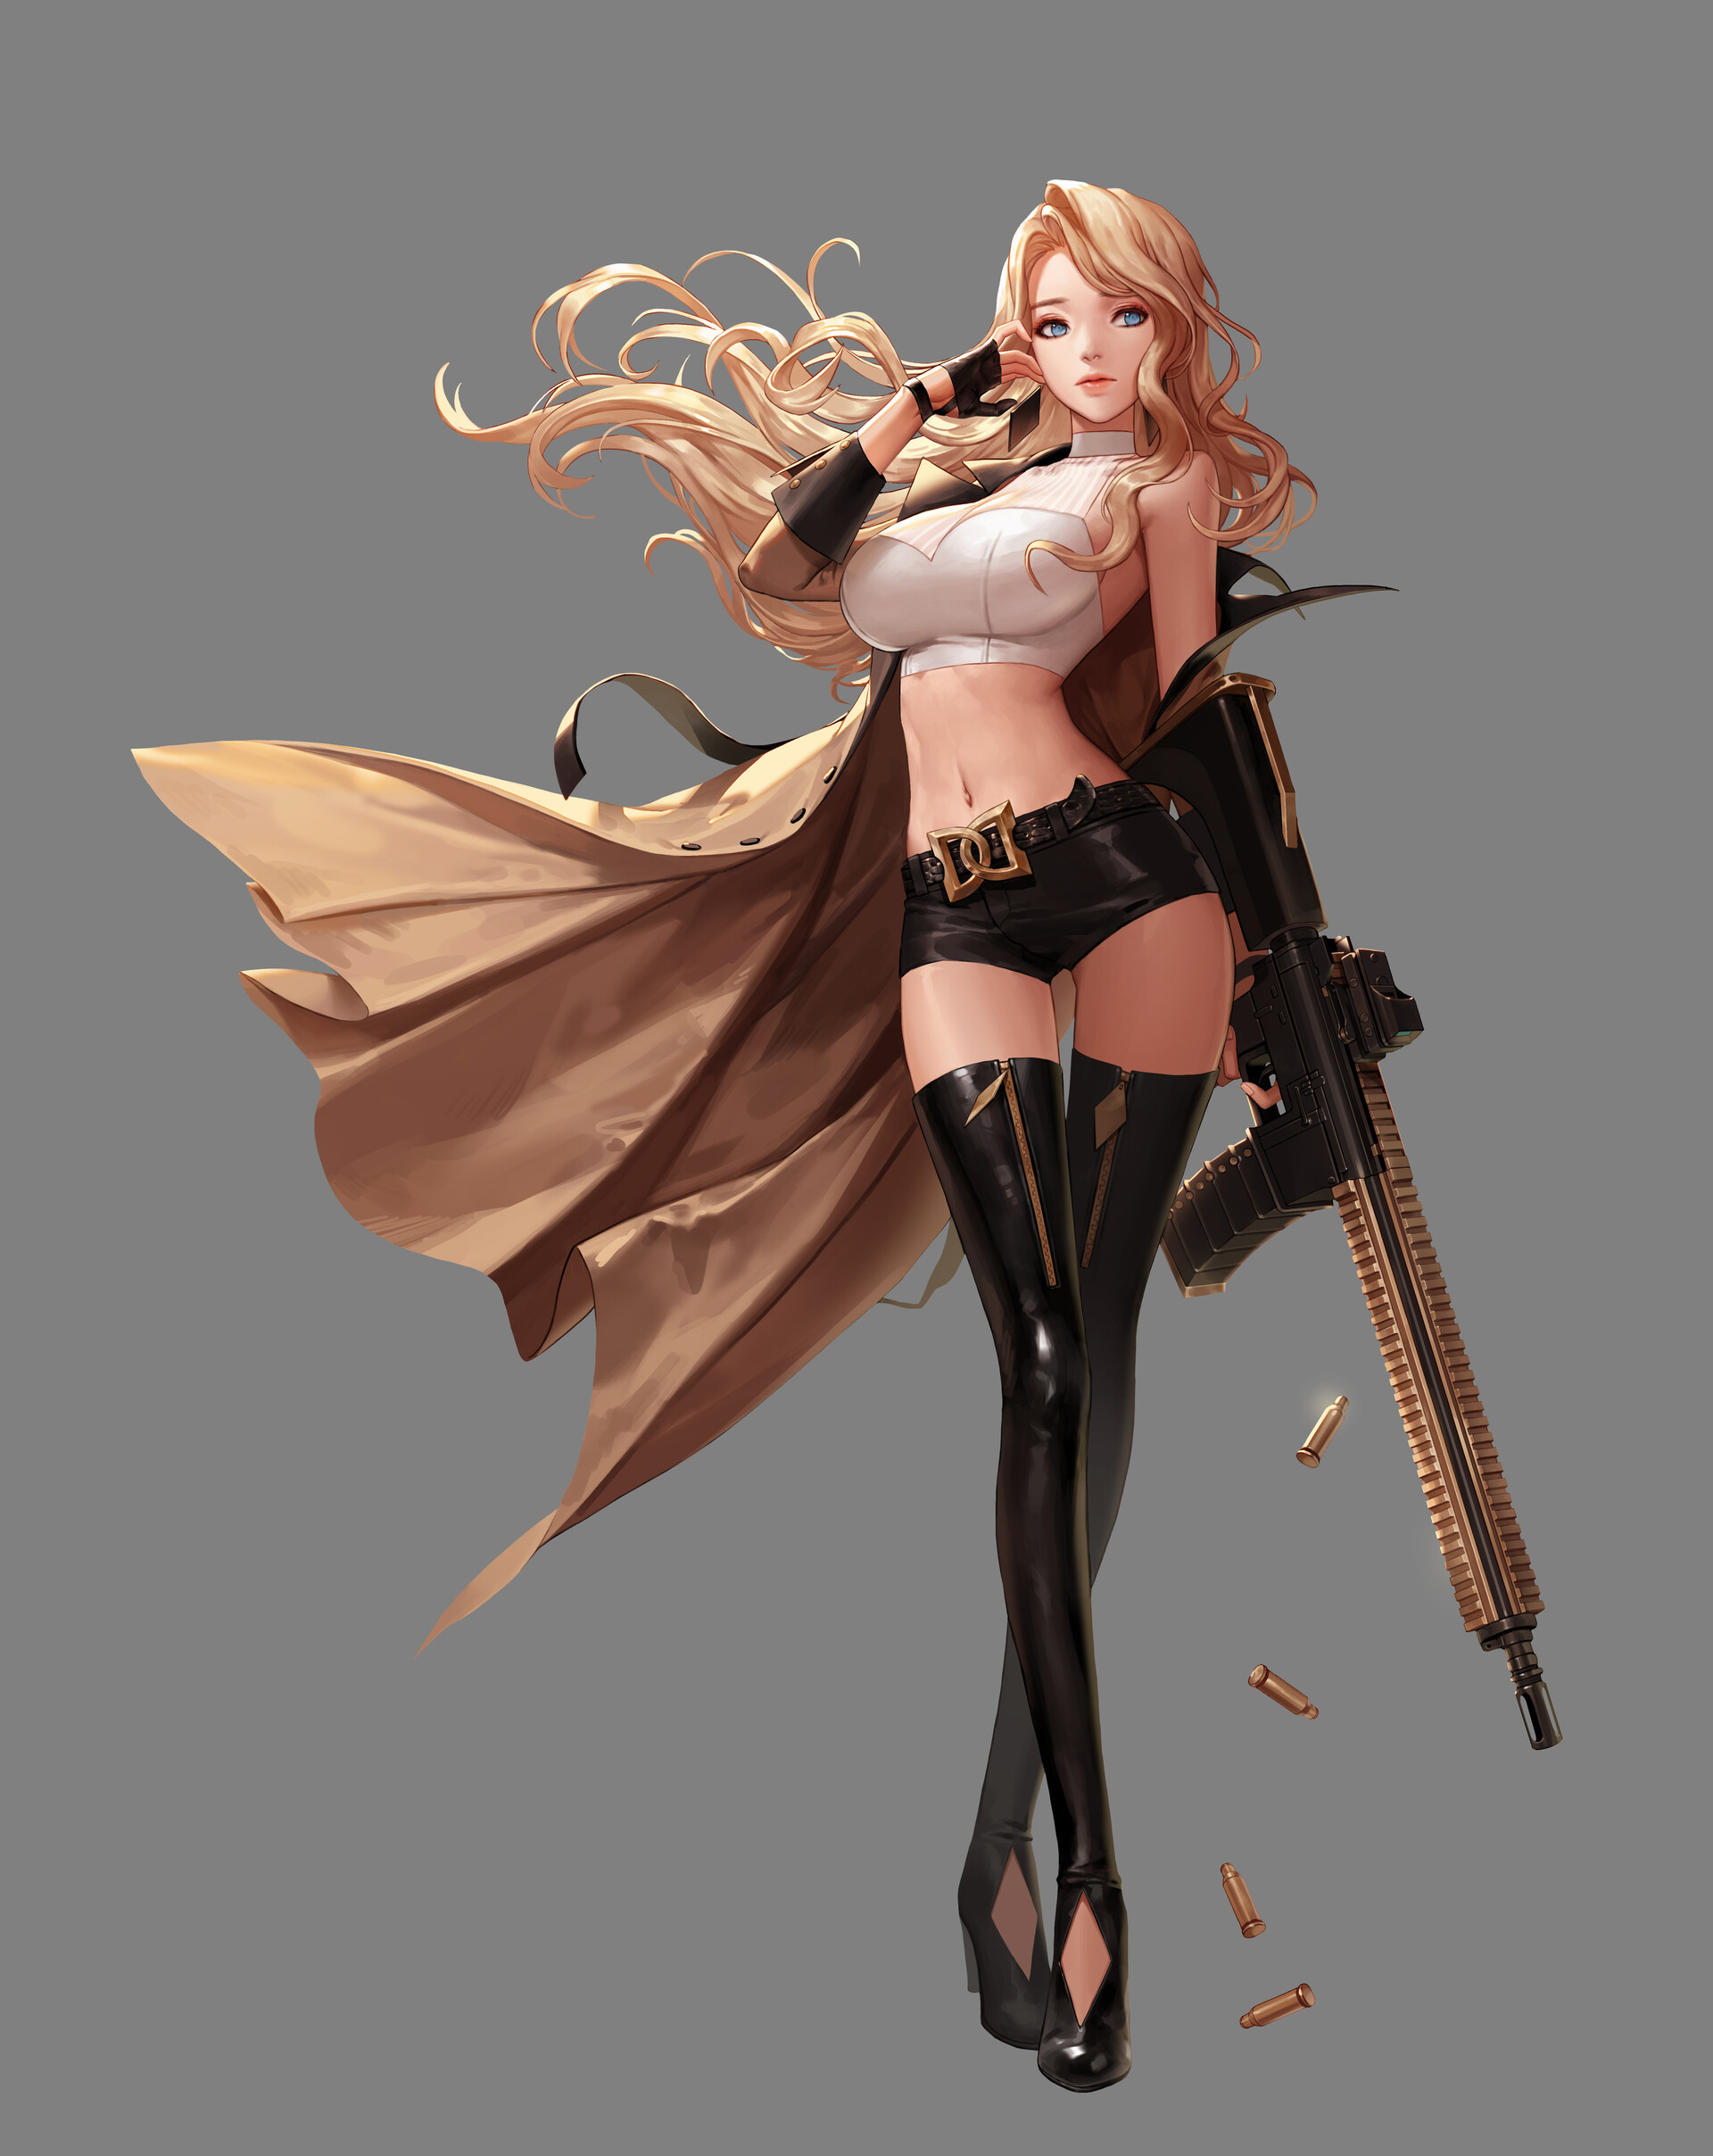 Anime 1920x2416 portrait display original characters simple background open coat crop top thigh high boots short shorts weapon blonde anime girls